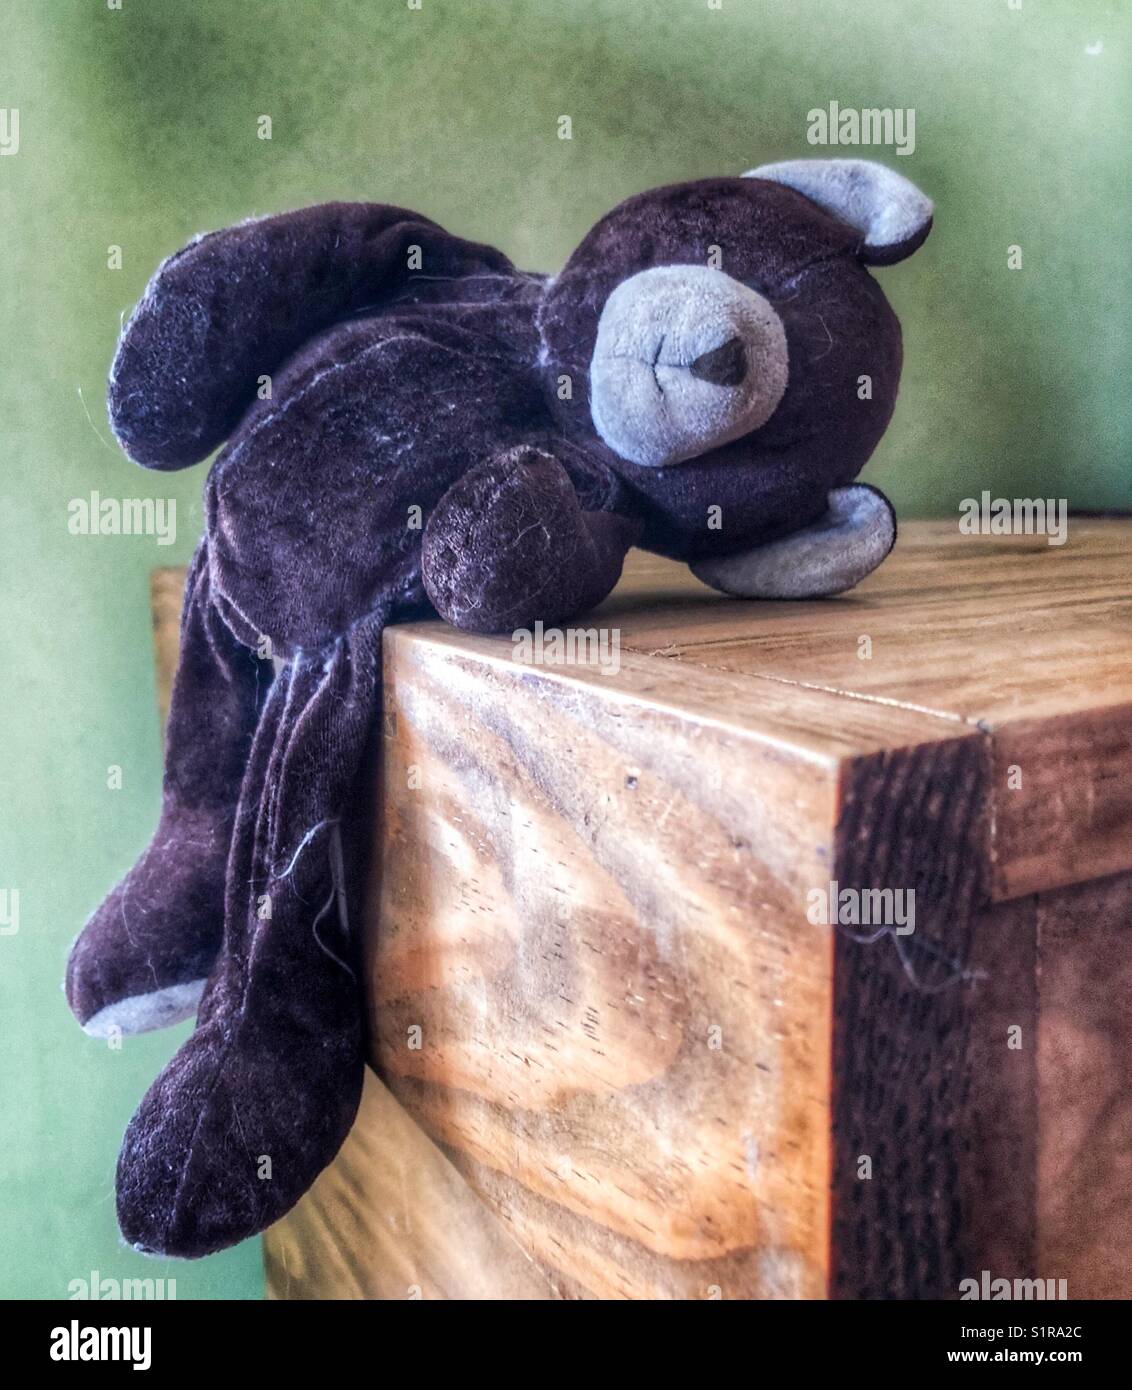 Old, brown teddy bear slumped over on edge of wooden table Stock Photo